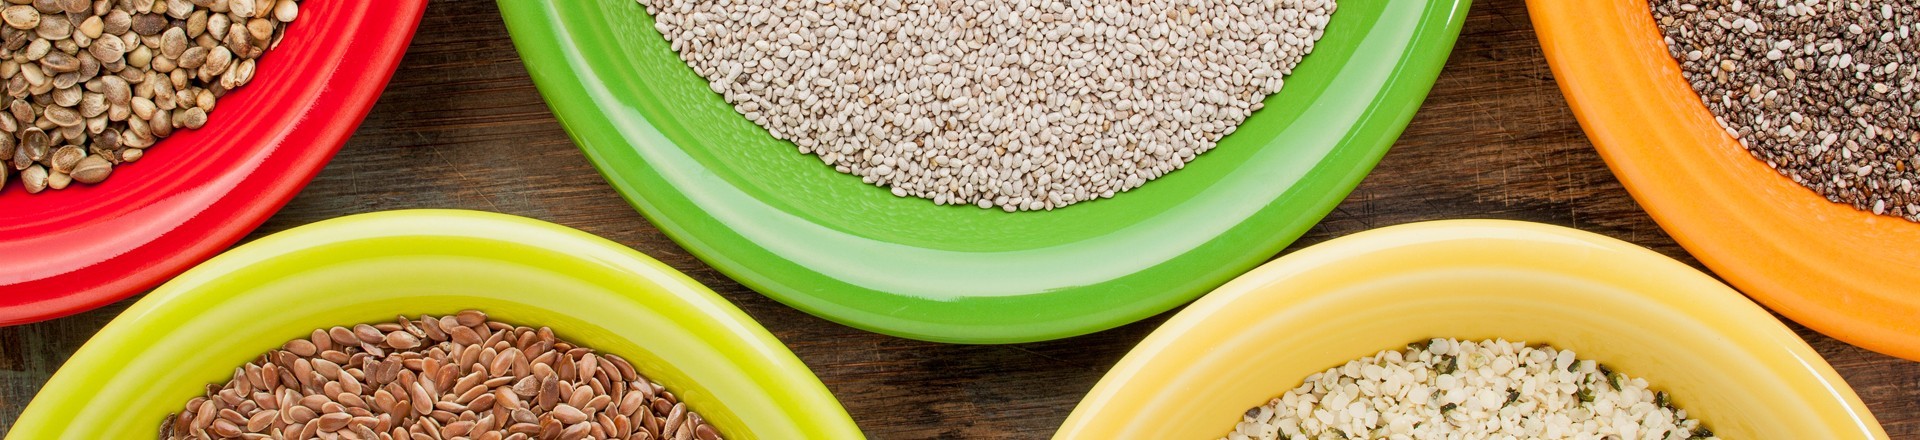 white and black chia, flax and hemp seeds in colorful ceramic bowls